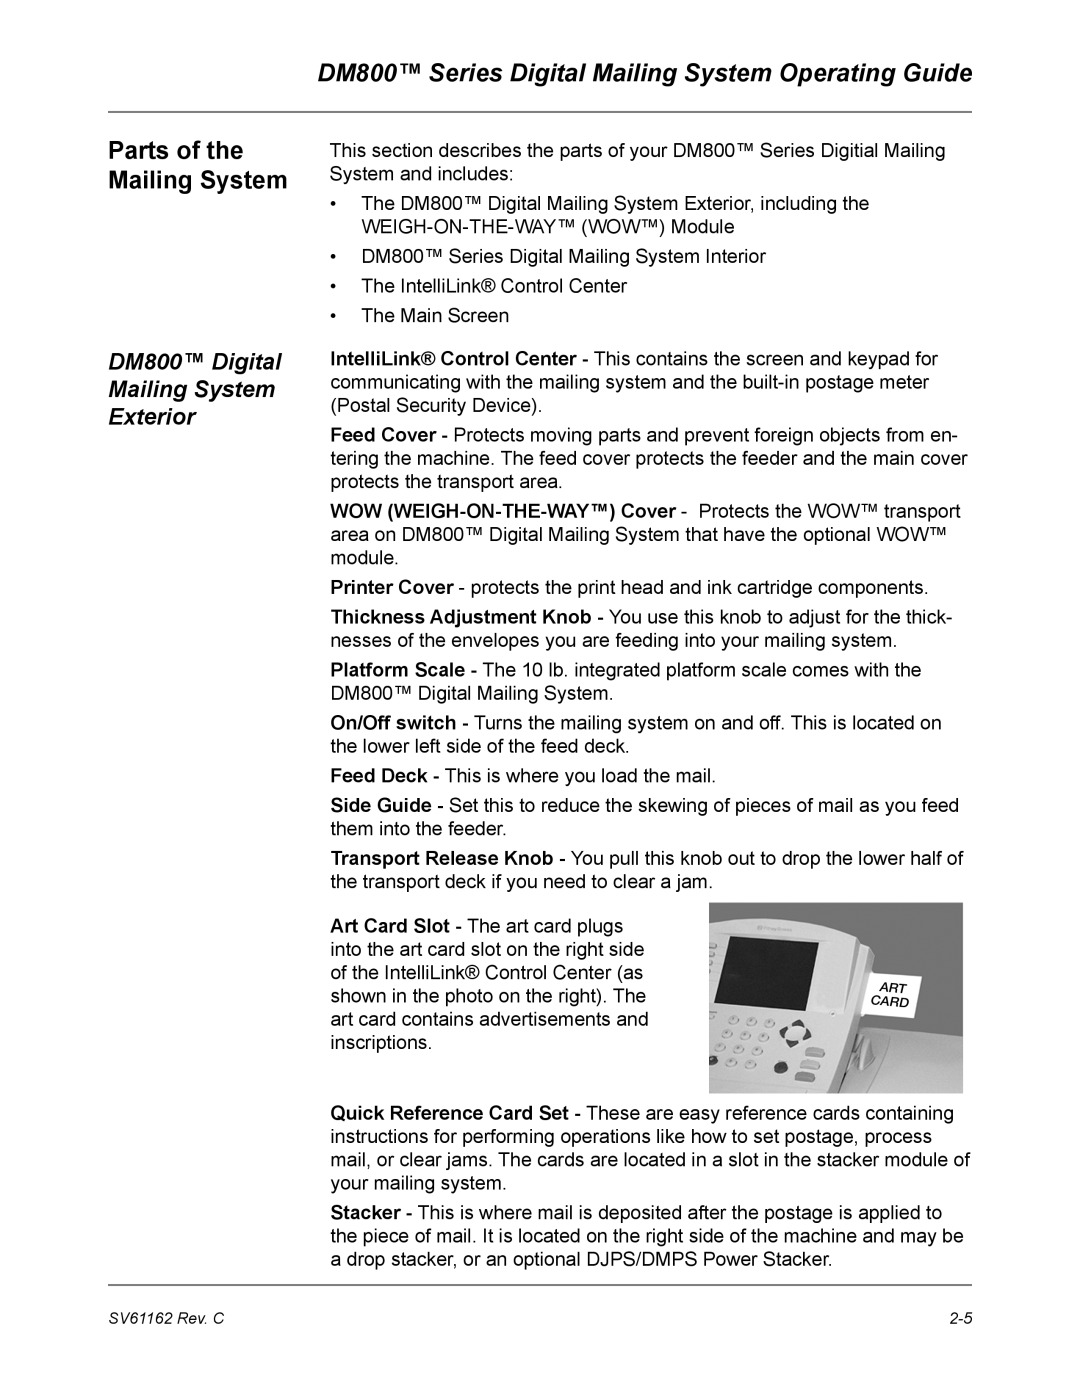 Pitney Bowes manual Parts of the Mailing System, DM800 Digital Mailing System Exterior 